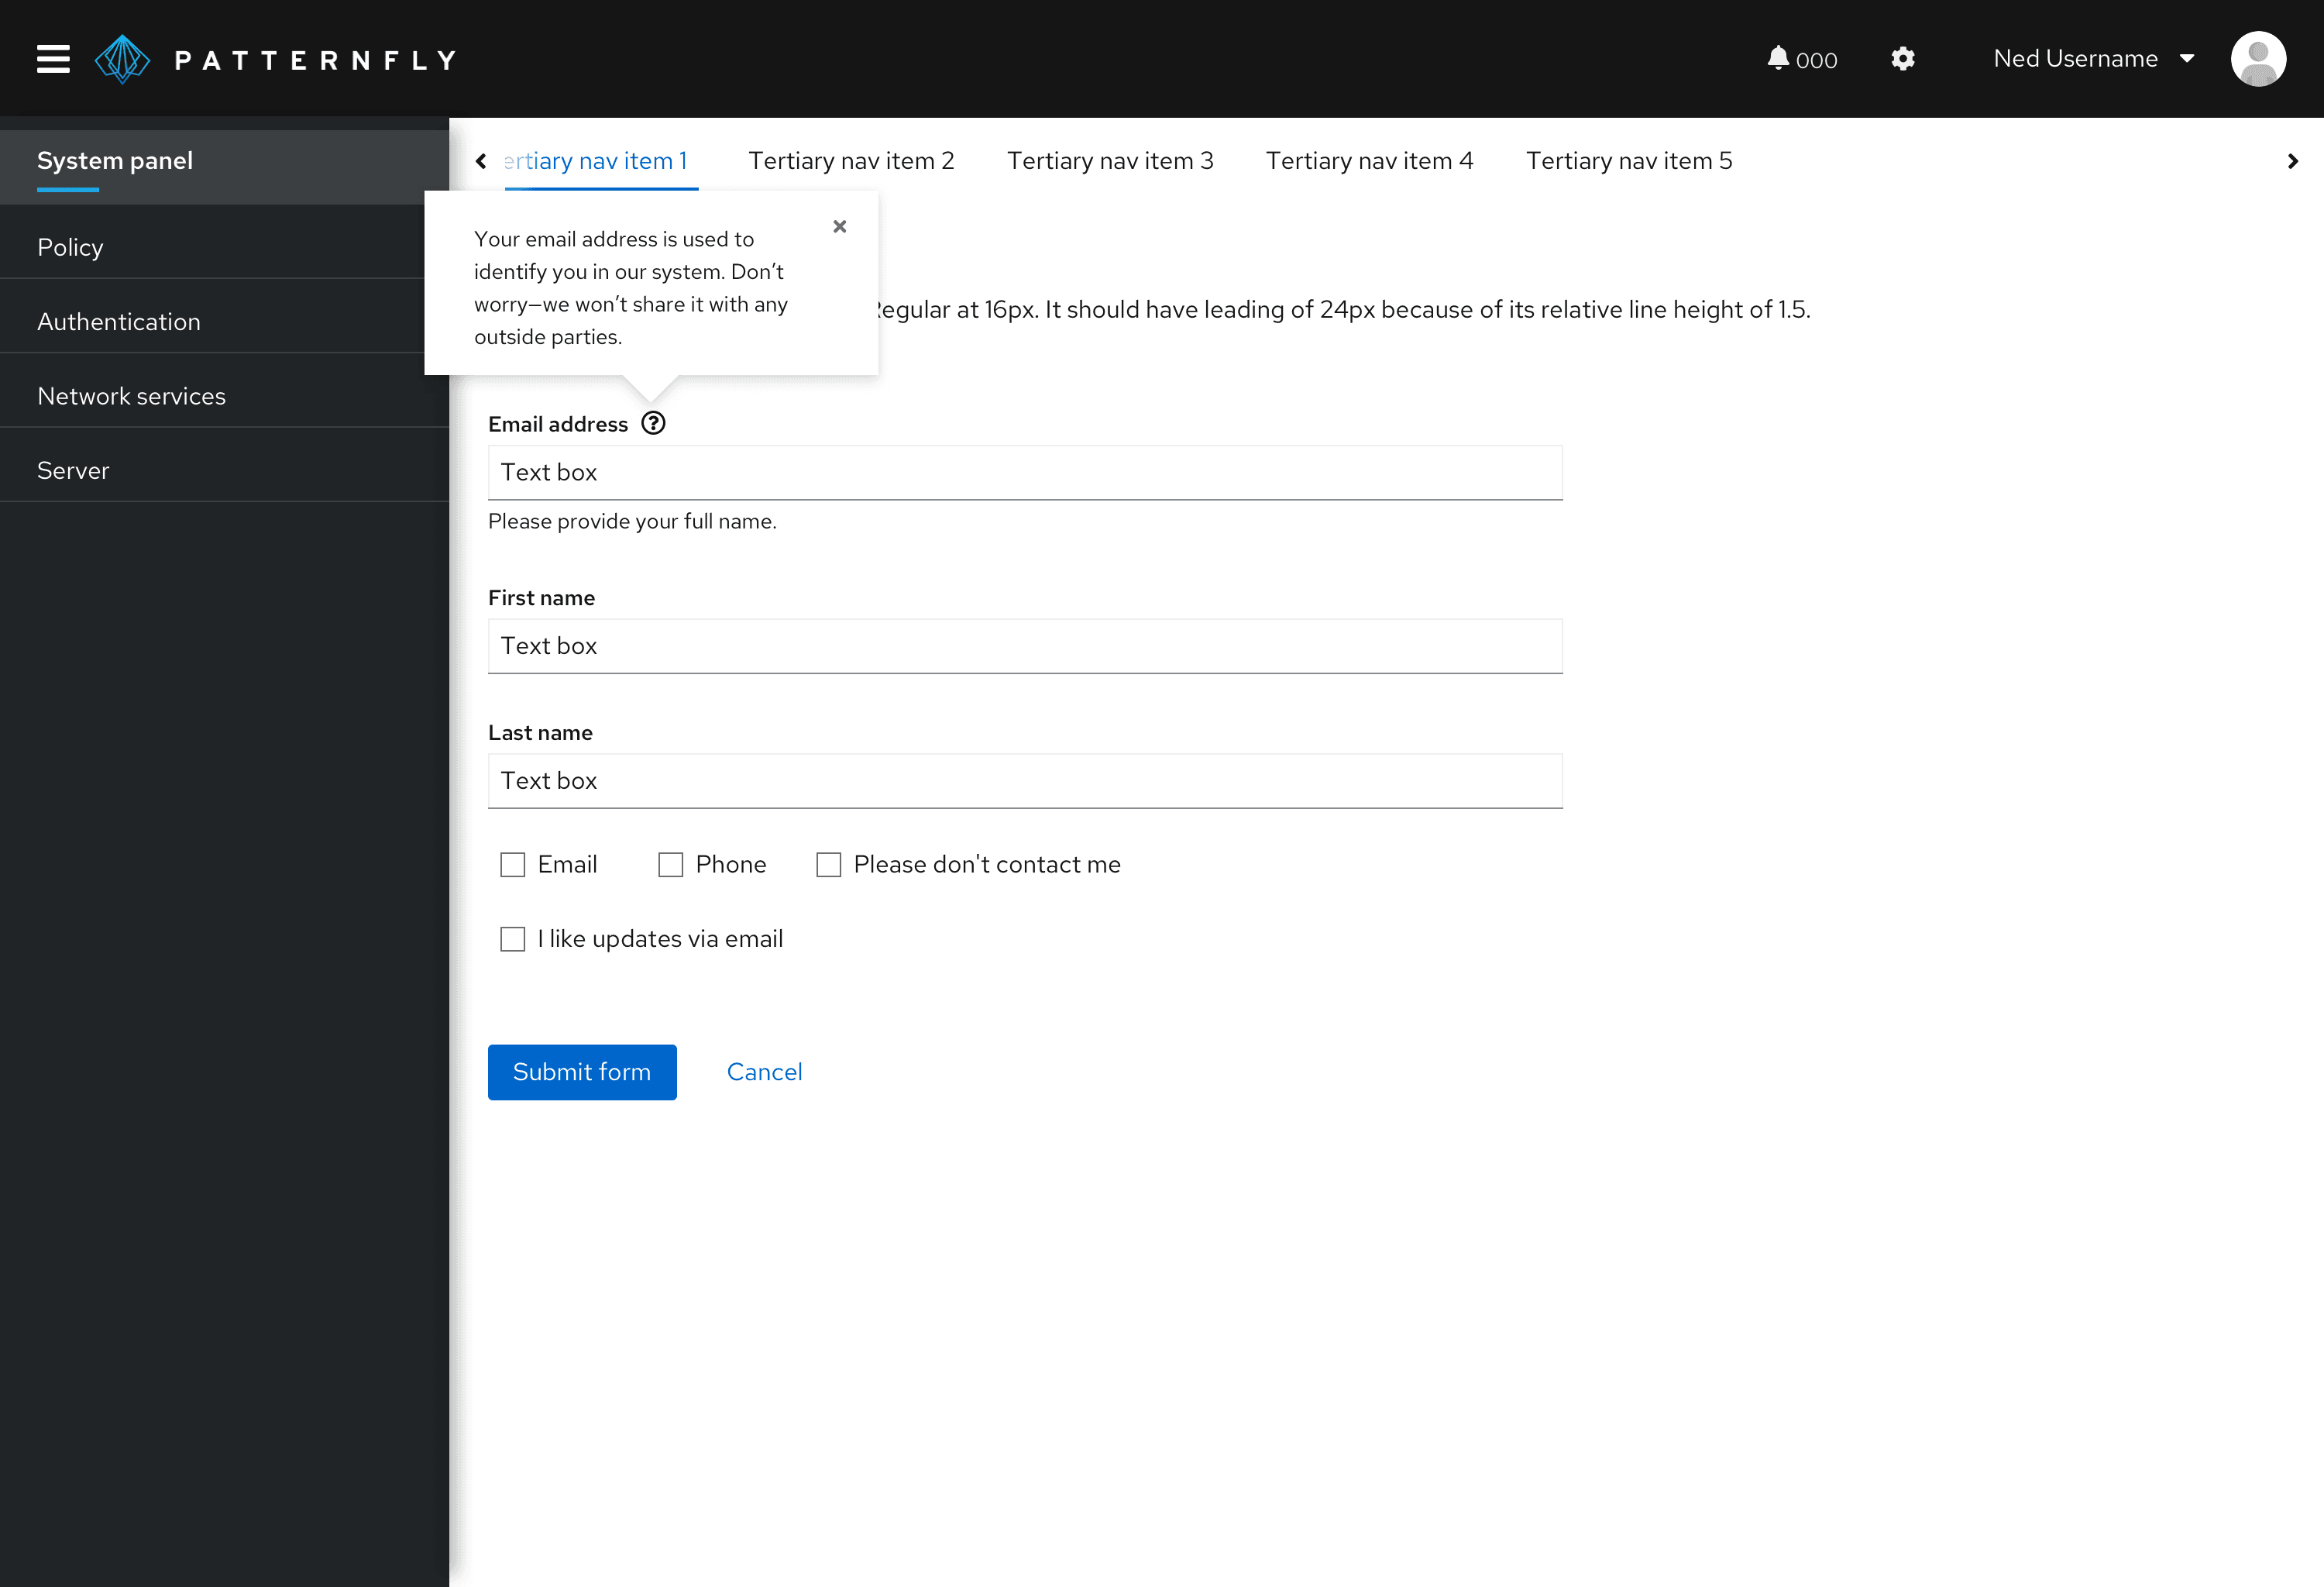 popover for an email address form field explaining what the email address is used for